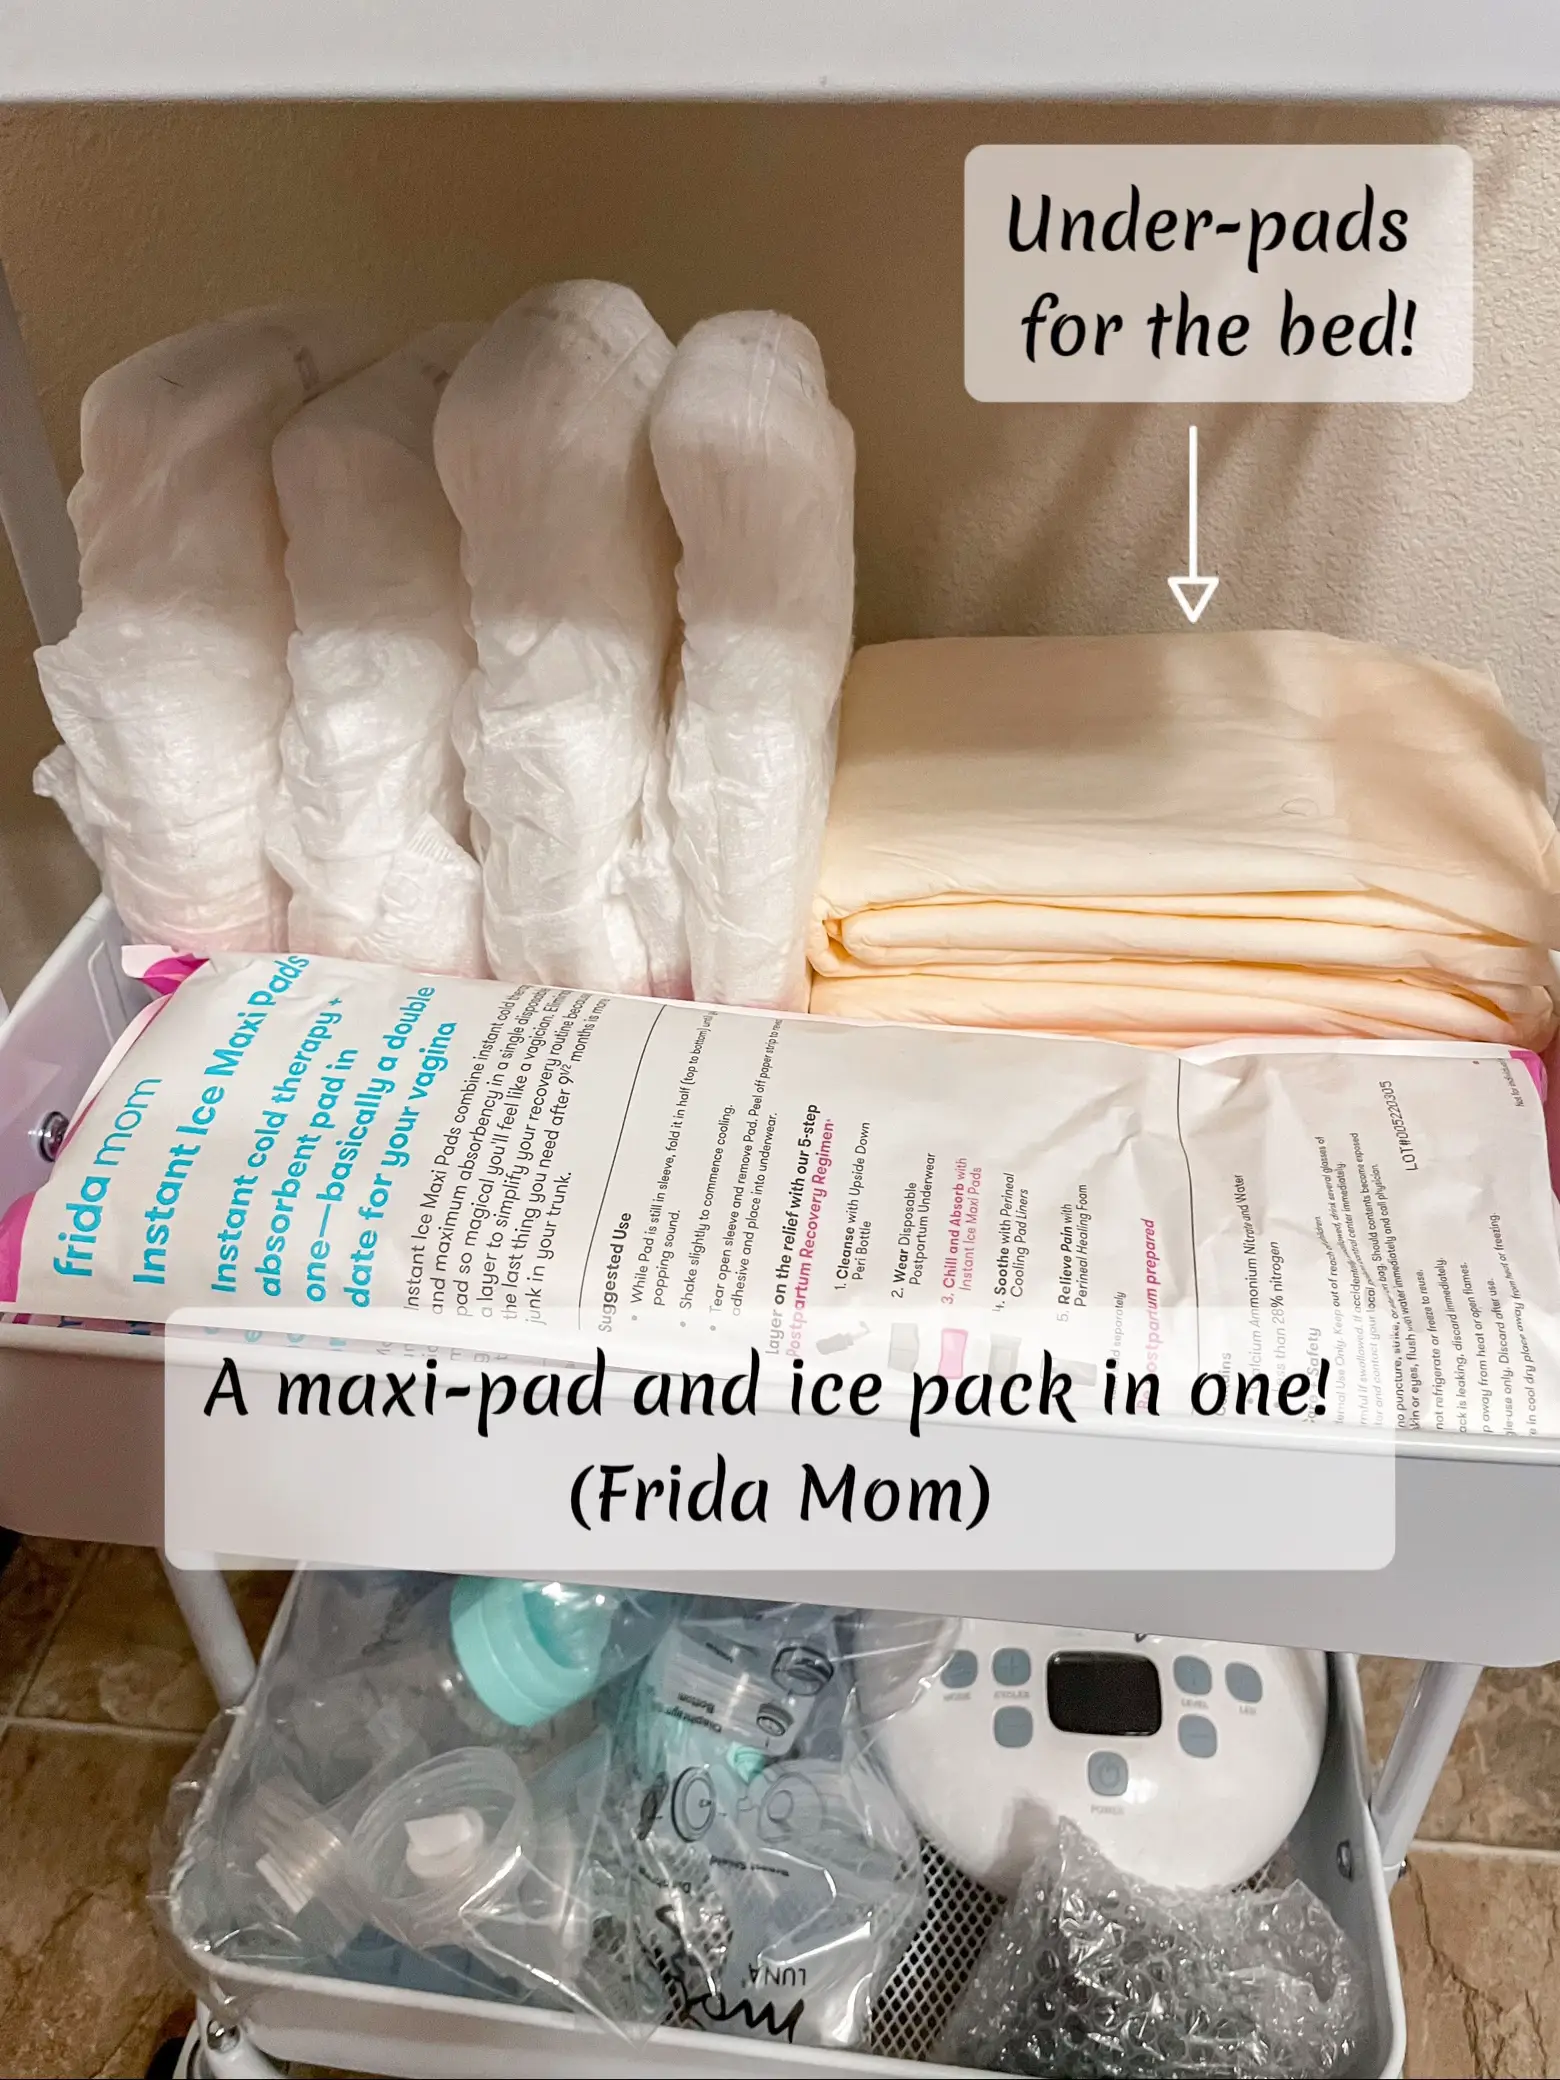 Opening and comparing the Frida Mom Postpartum recovery essential